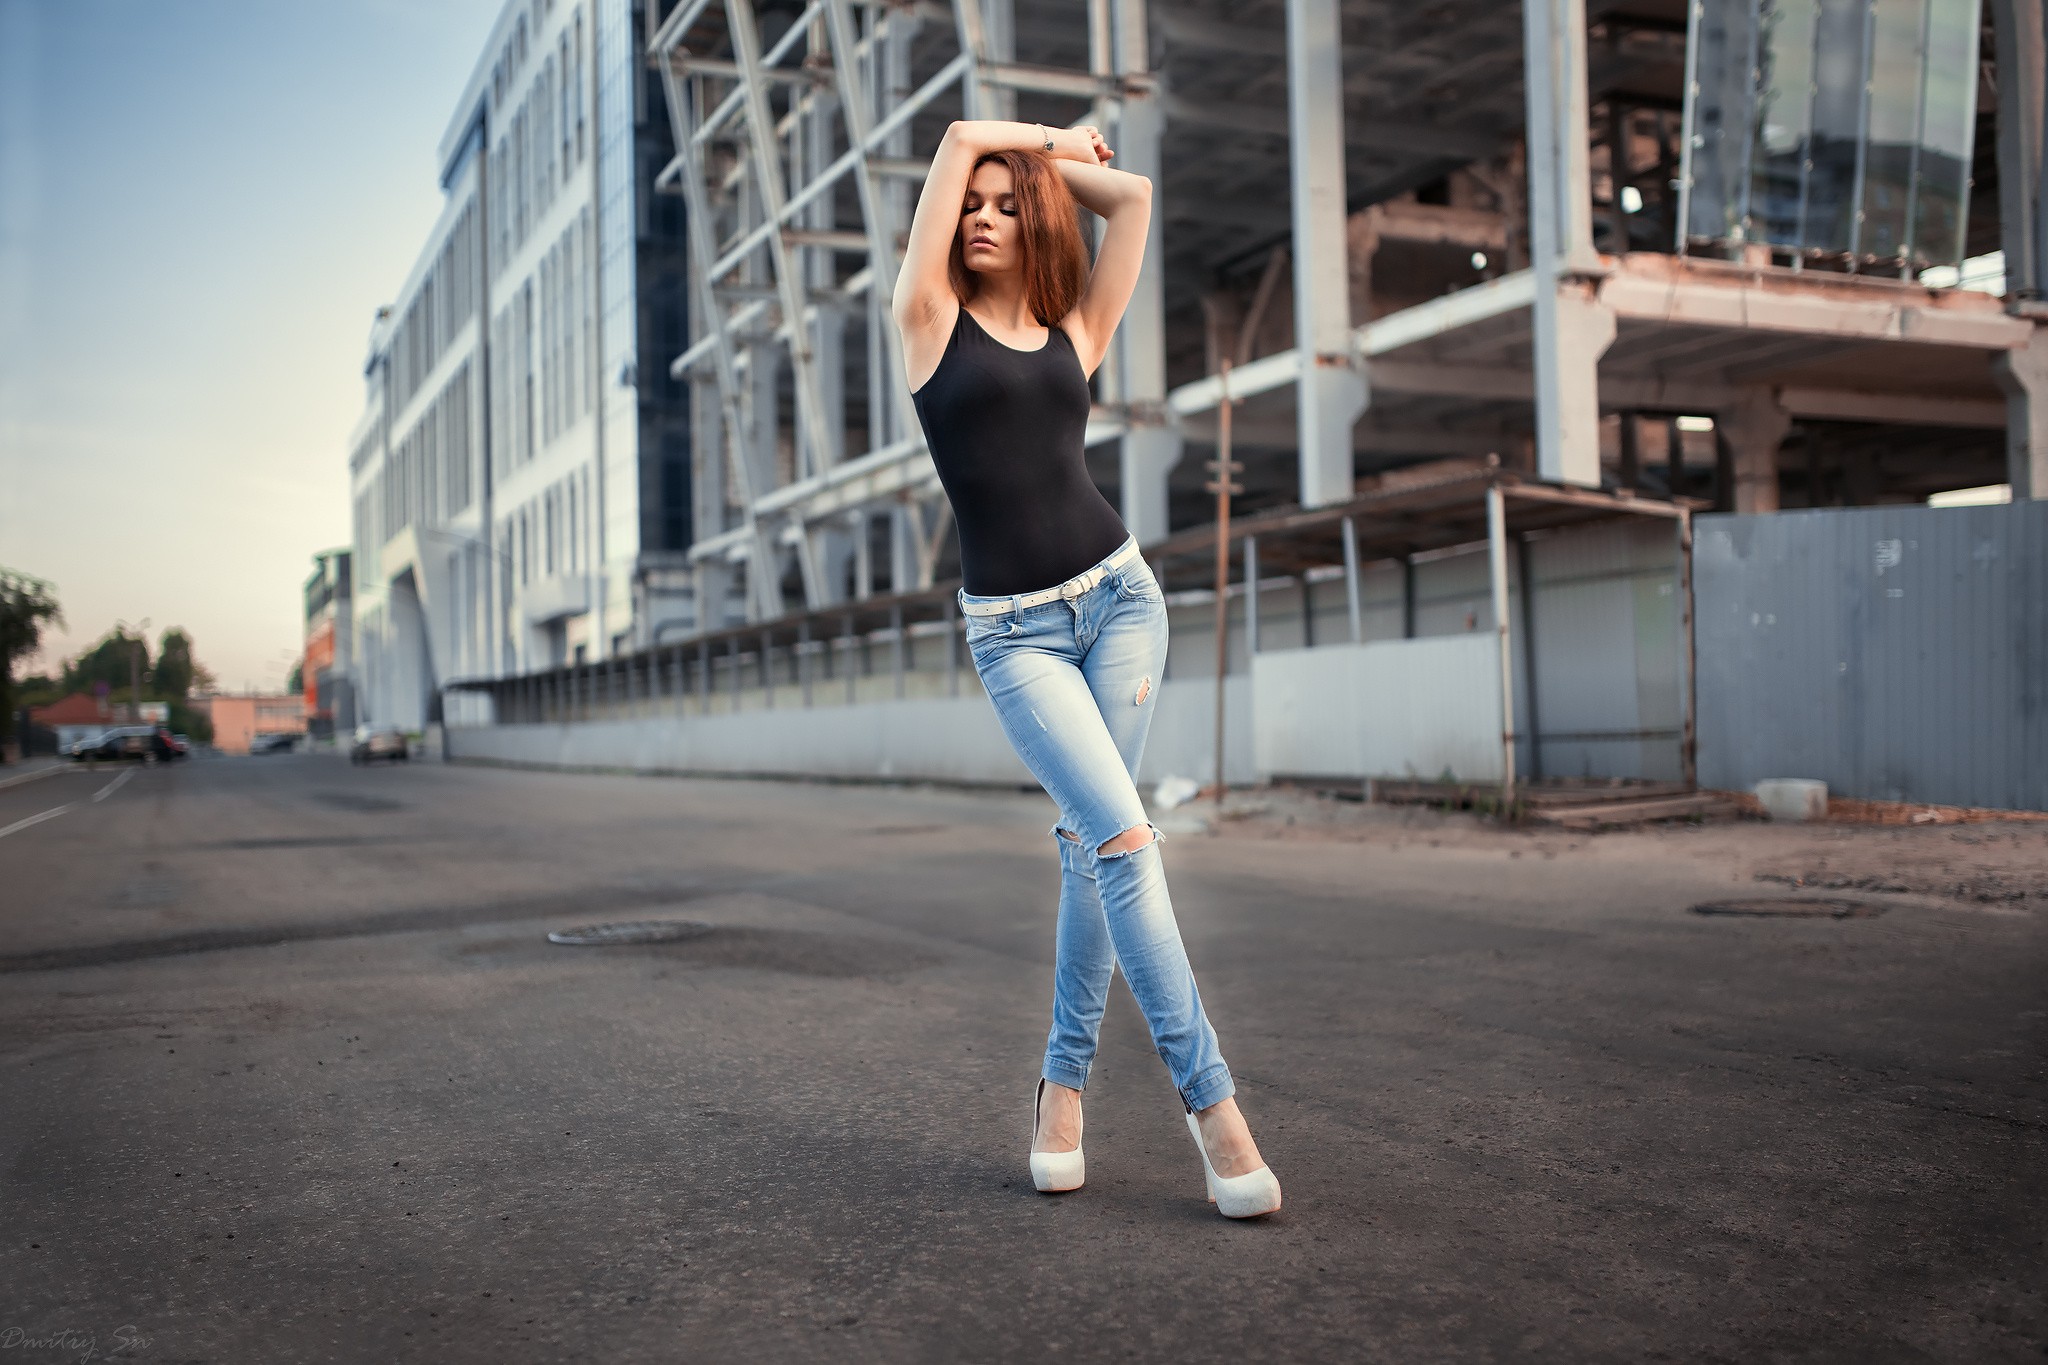 Women Redhead Hips Body Lingerie Jeans Armpits Arms Up High Heels Closed Eyes Urban Street Torn Jean 2048x1365